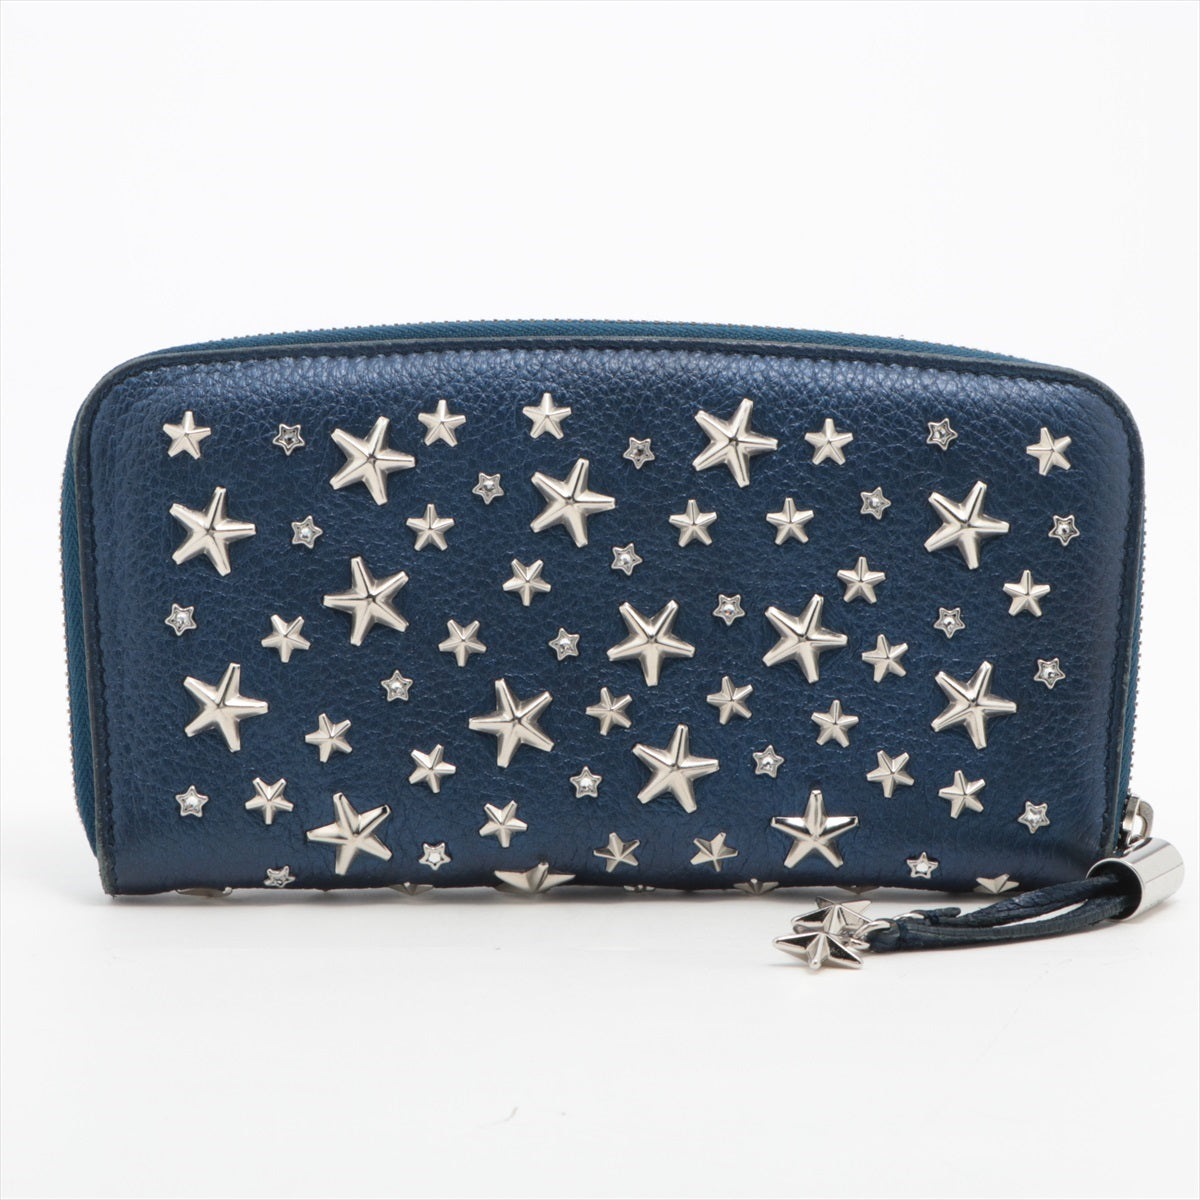 Jimmy Choo Star studs Leather Zip Round Wallet Blue